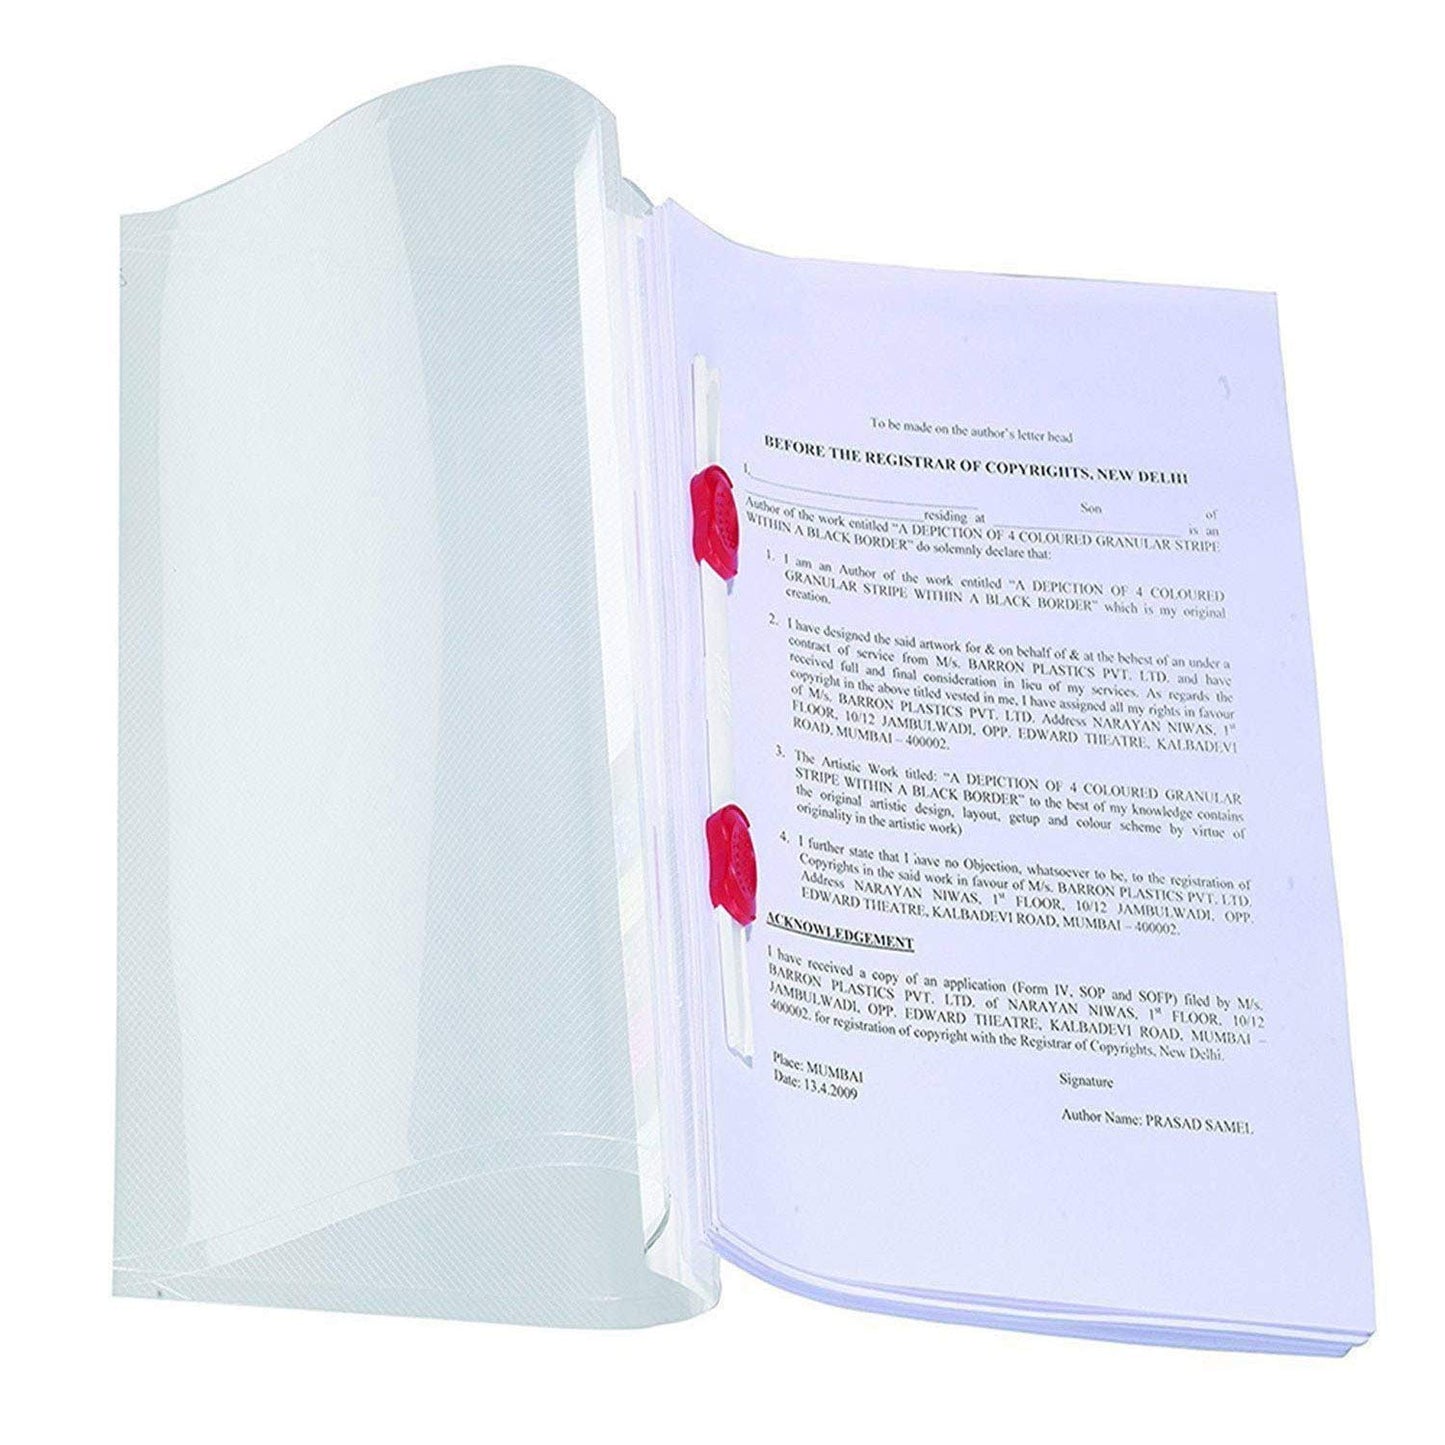 KIYA ® A4 Size Transparent Report File Folder Rf051 with Plastic Clip for Certificates, Office Documents, Reports, Page Holder, Presentation | Pack of 1 Pieces (Transparent)